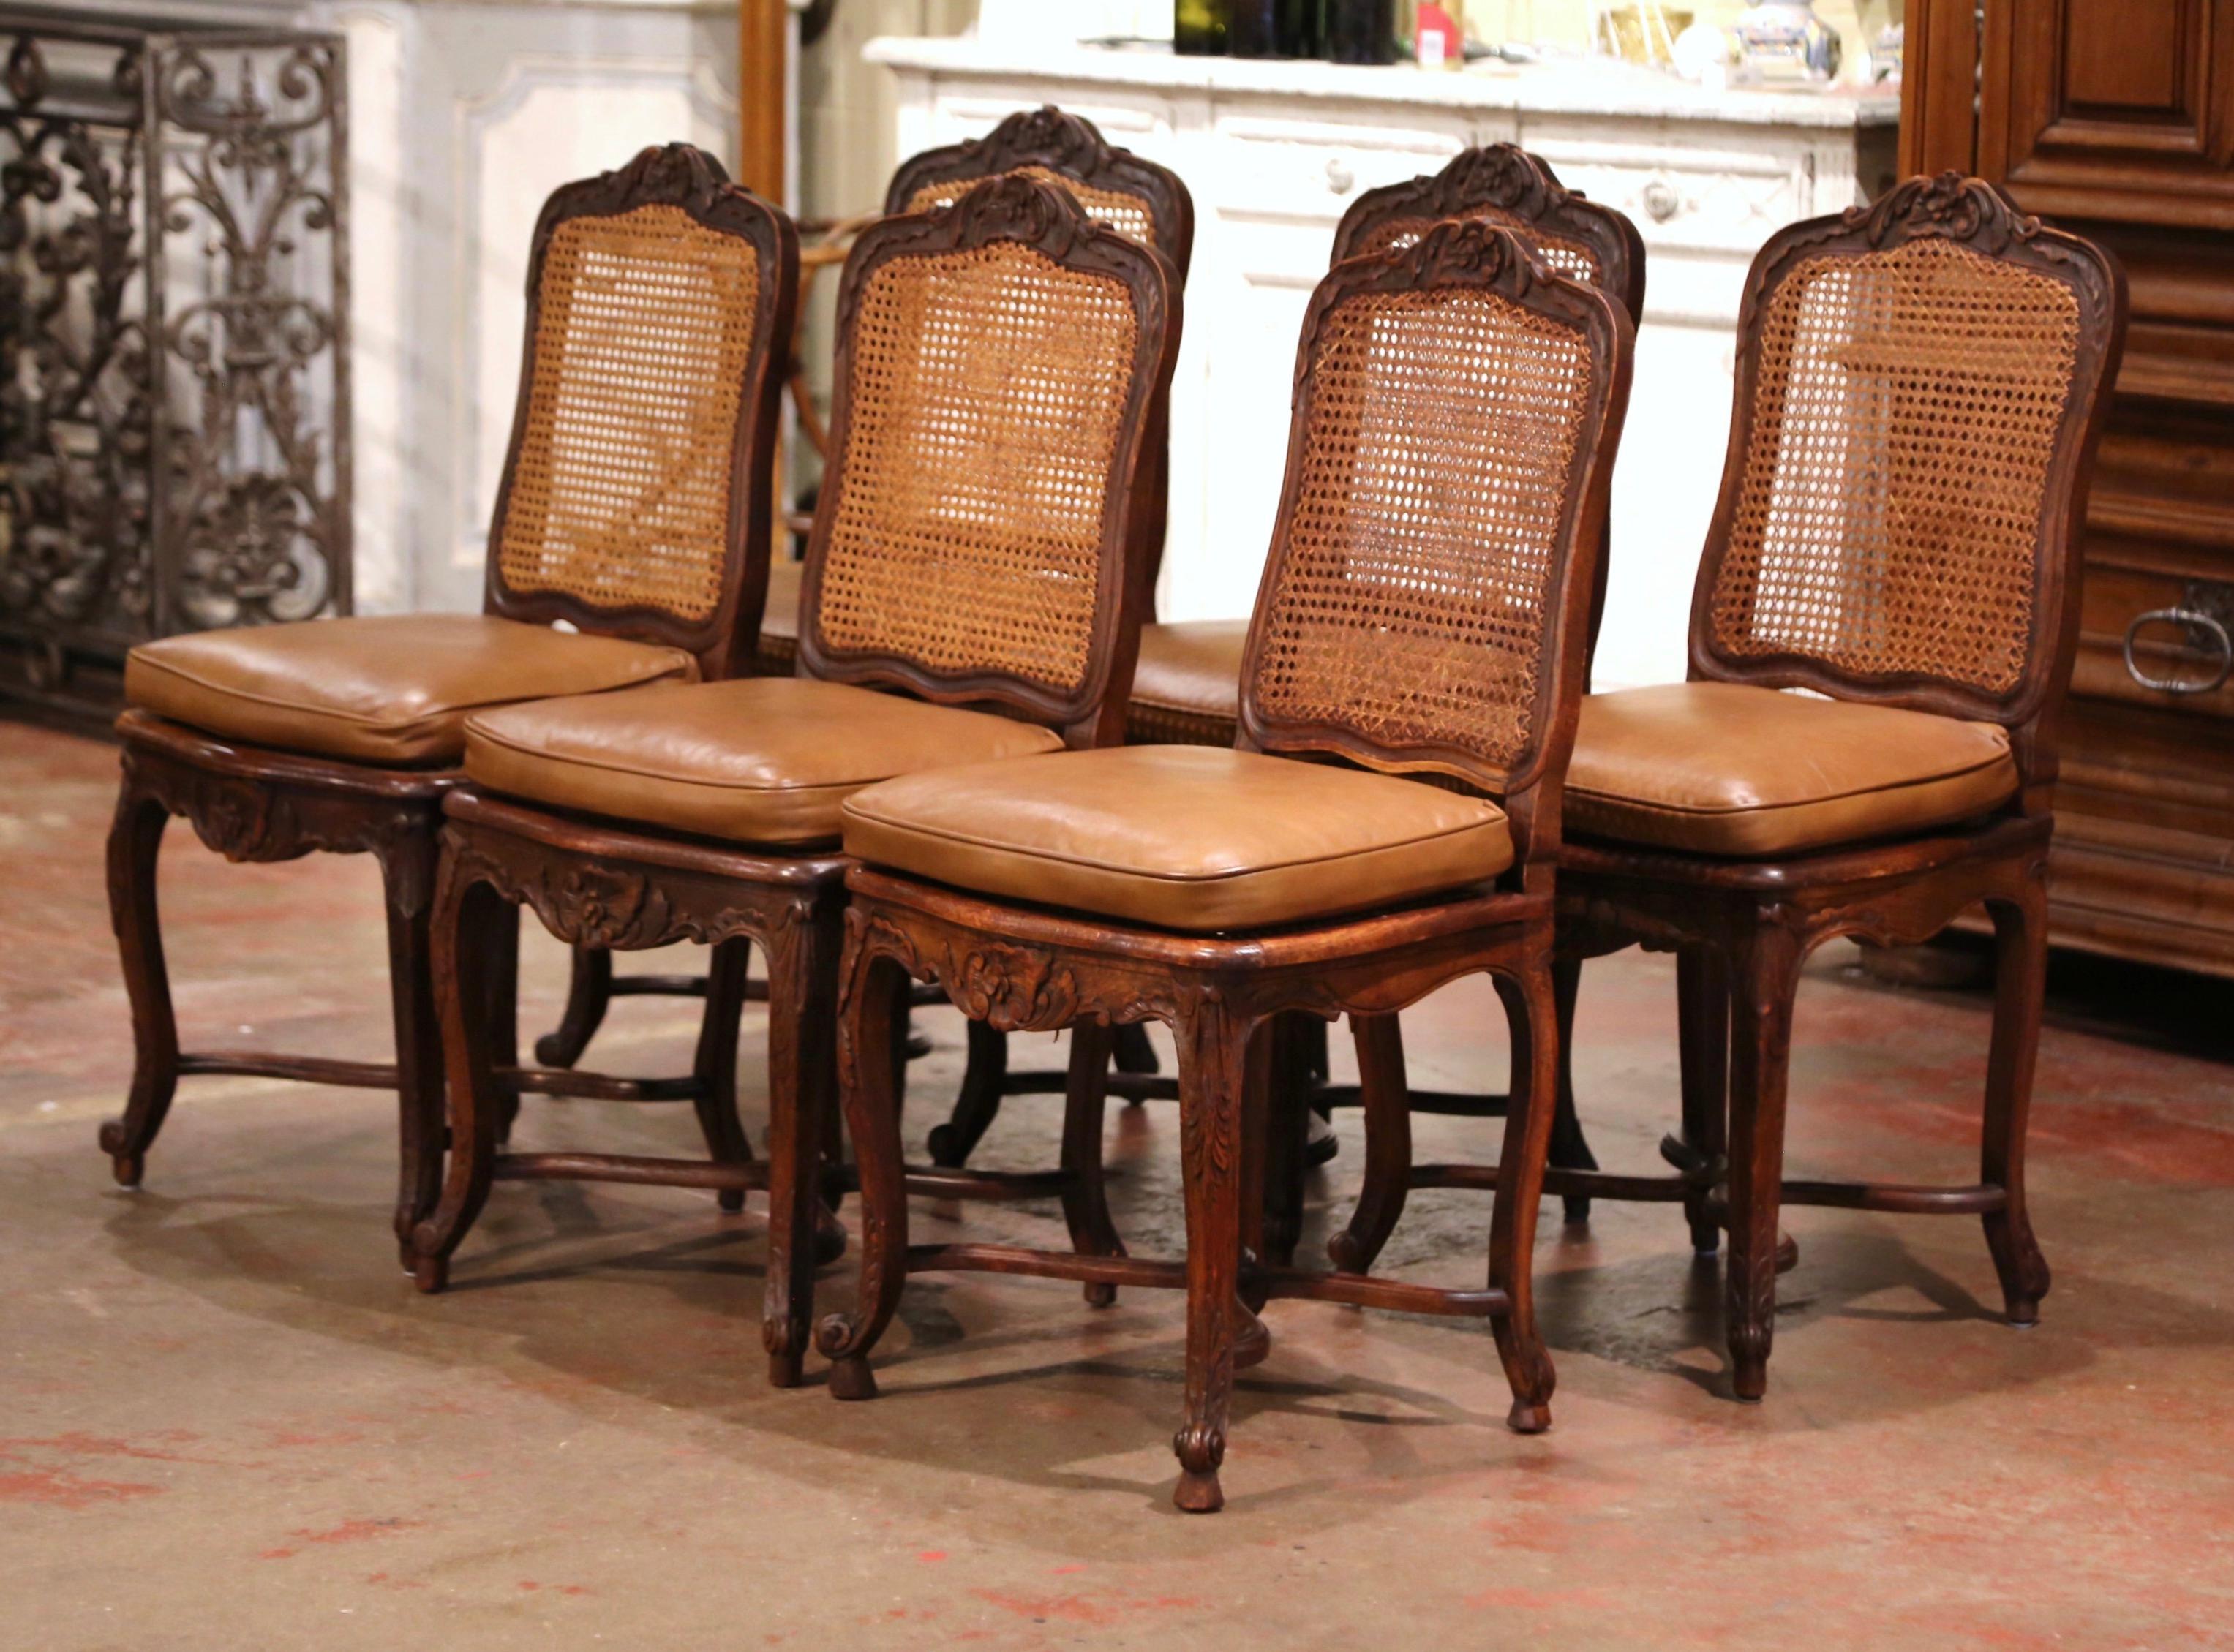 Decorate a dining table with this elegant suite of antique side chairs. Crafted in France circa 1880, each chair stands on cabriole legs ending with escargot feet over an X bottom stretcher decorated with a floral medallion. Scalloped apron